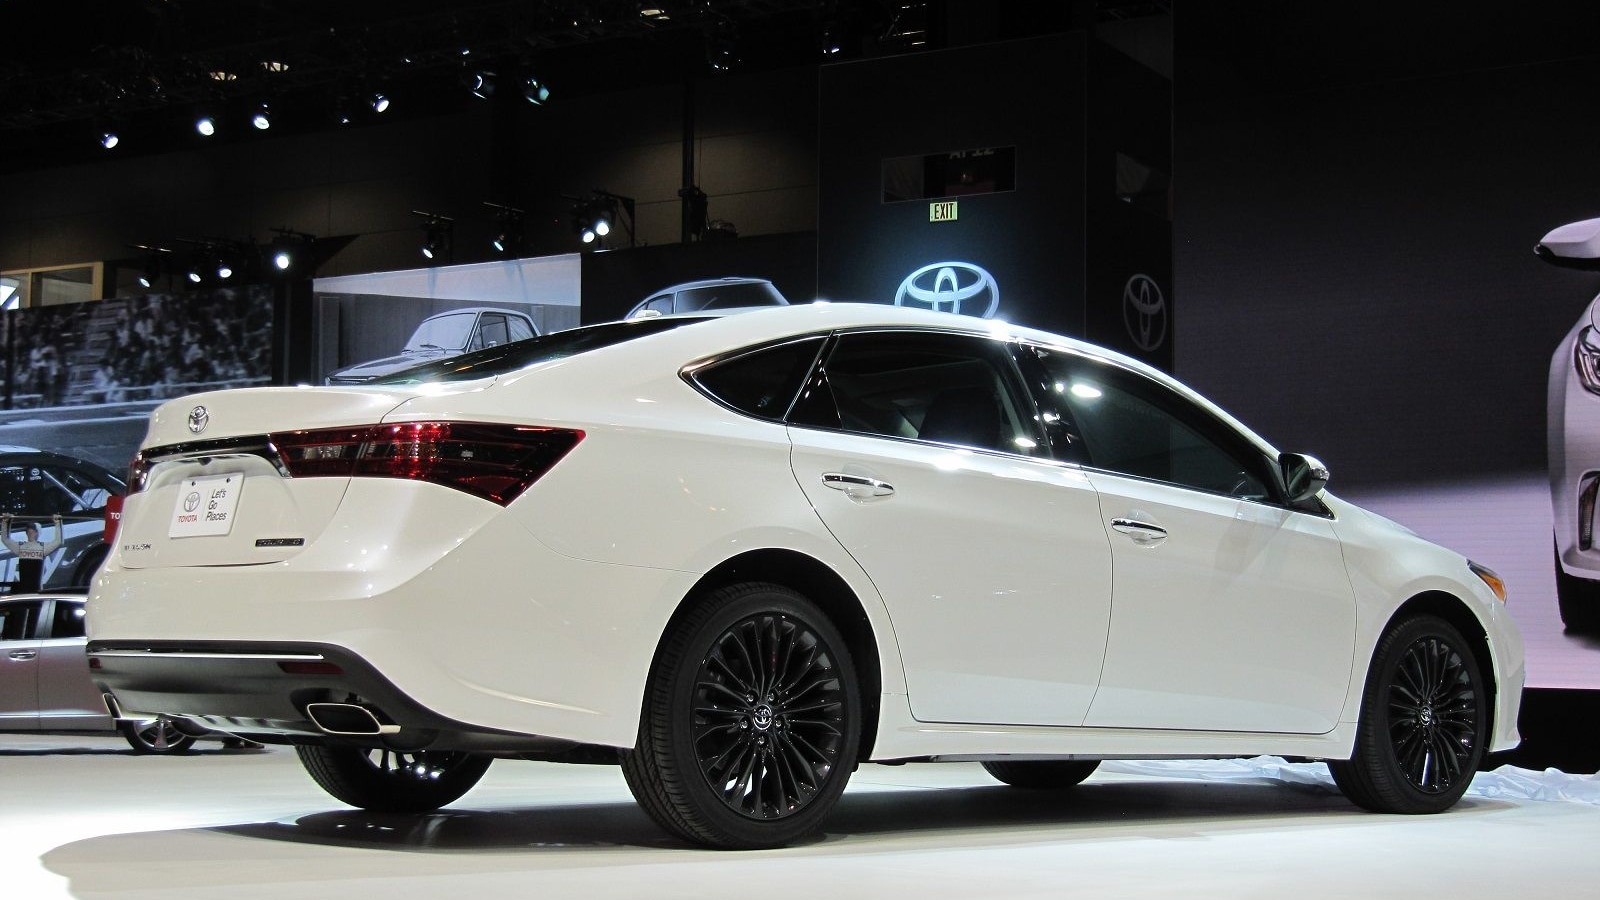 2016 Toyota Avalon launch at 2015 Chicago Auto Show